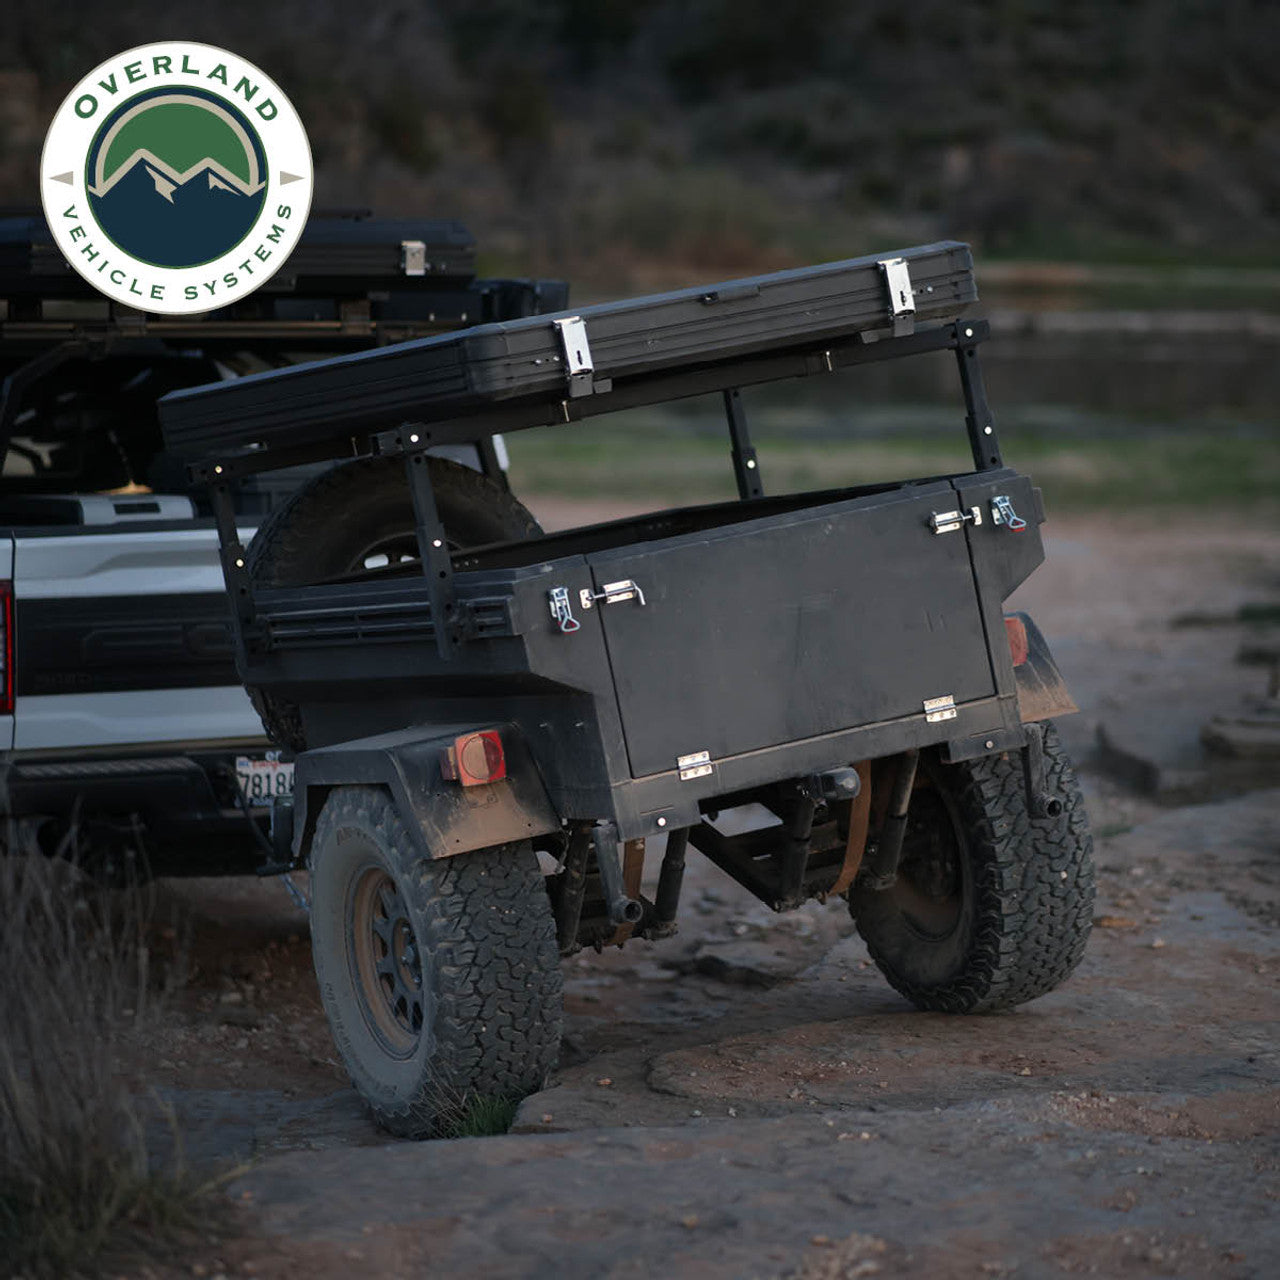 OVS Off Road Trailer Military Style With Full Articulating Suspension